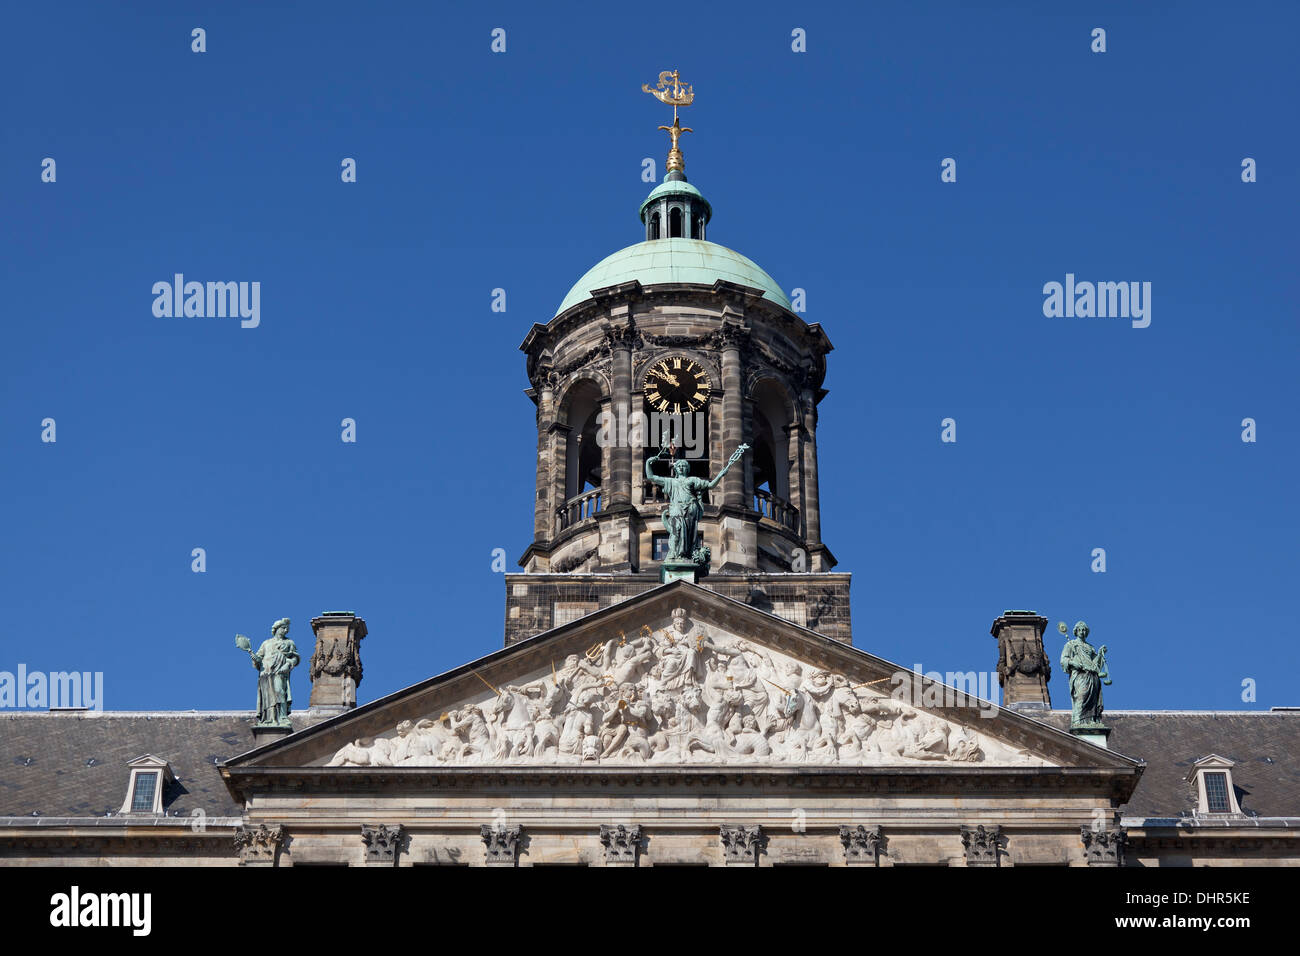 Tower of the Royal Palace in Amsterdam, Netherlands Stock Photo